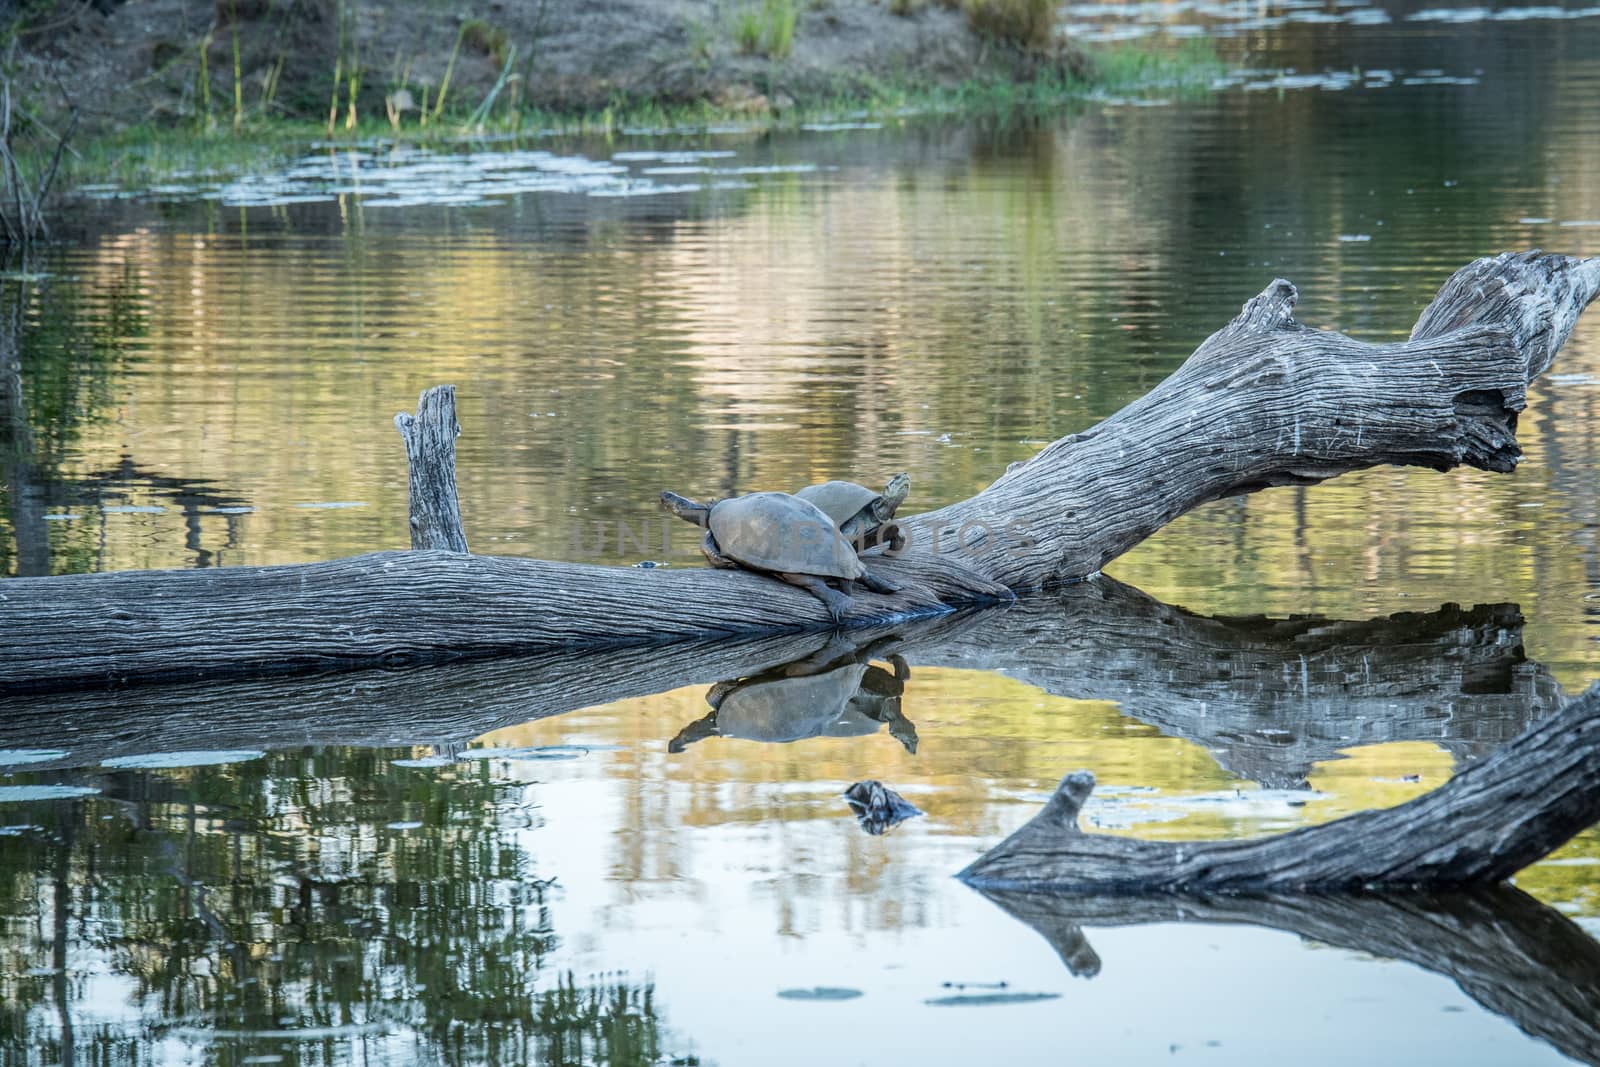 Two Speckled terrapins on a branch in the water in the Kruger National Park, South Africa.